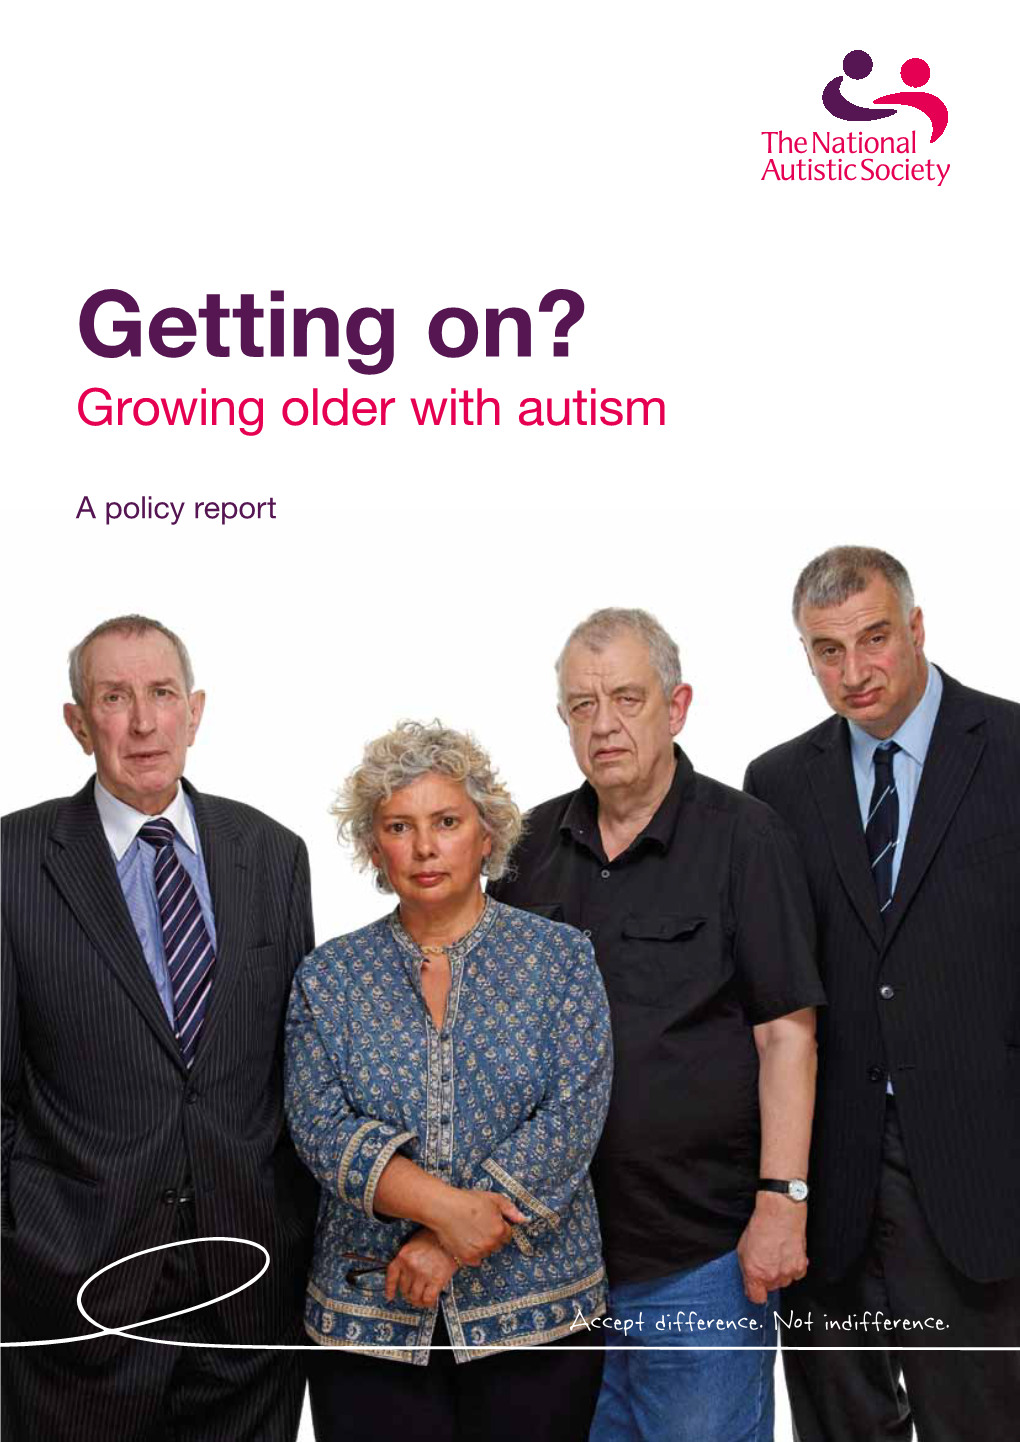 About the National Autistic Society the National Autistic Society (NAS) Is the UK’S Leading Charity for People Affected by Autism